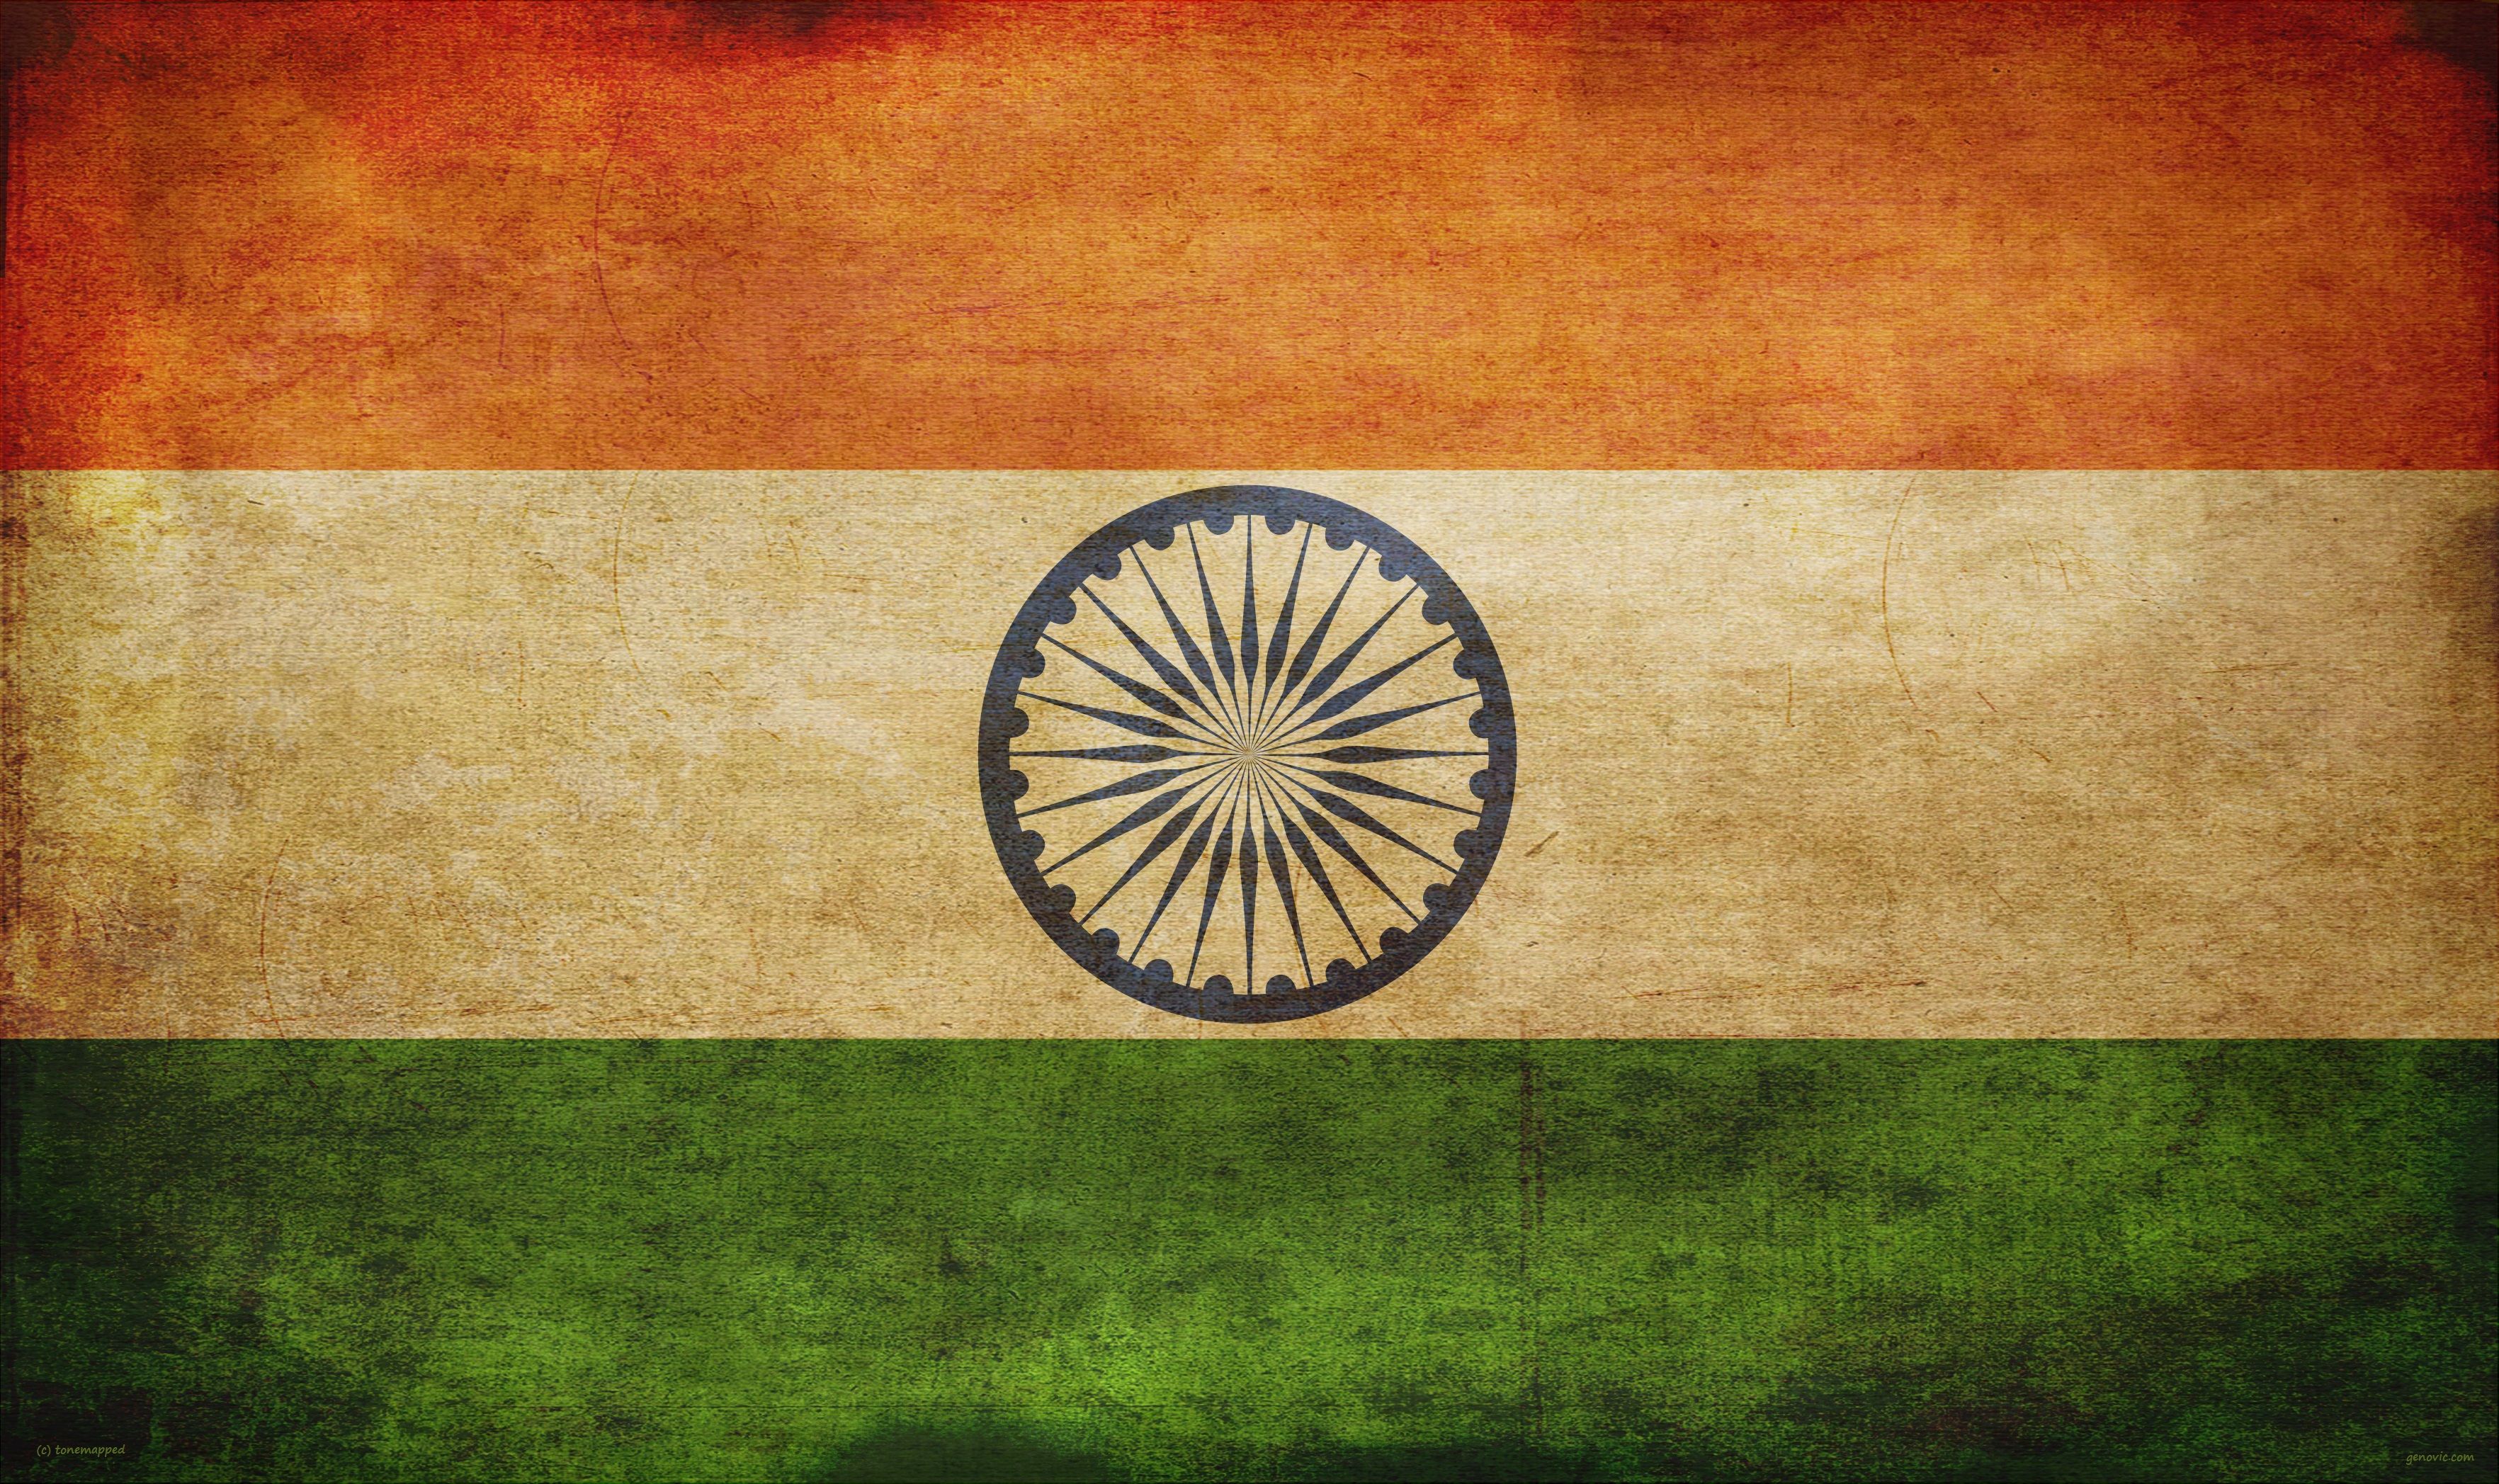 Indian Flag Wallpapers High Resolution HD - Wallpaper Cave